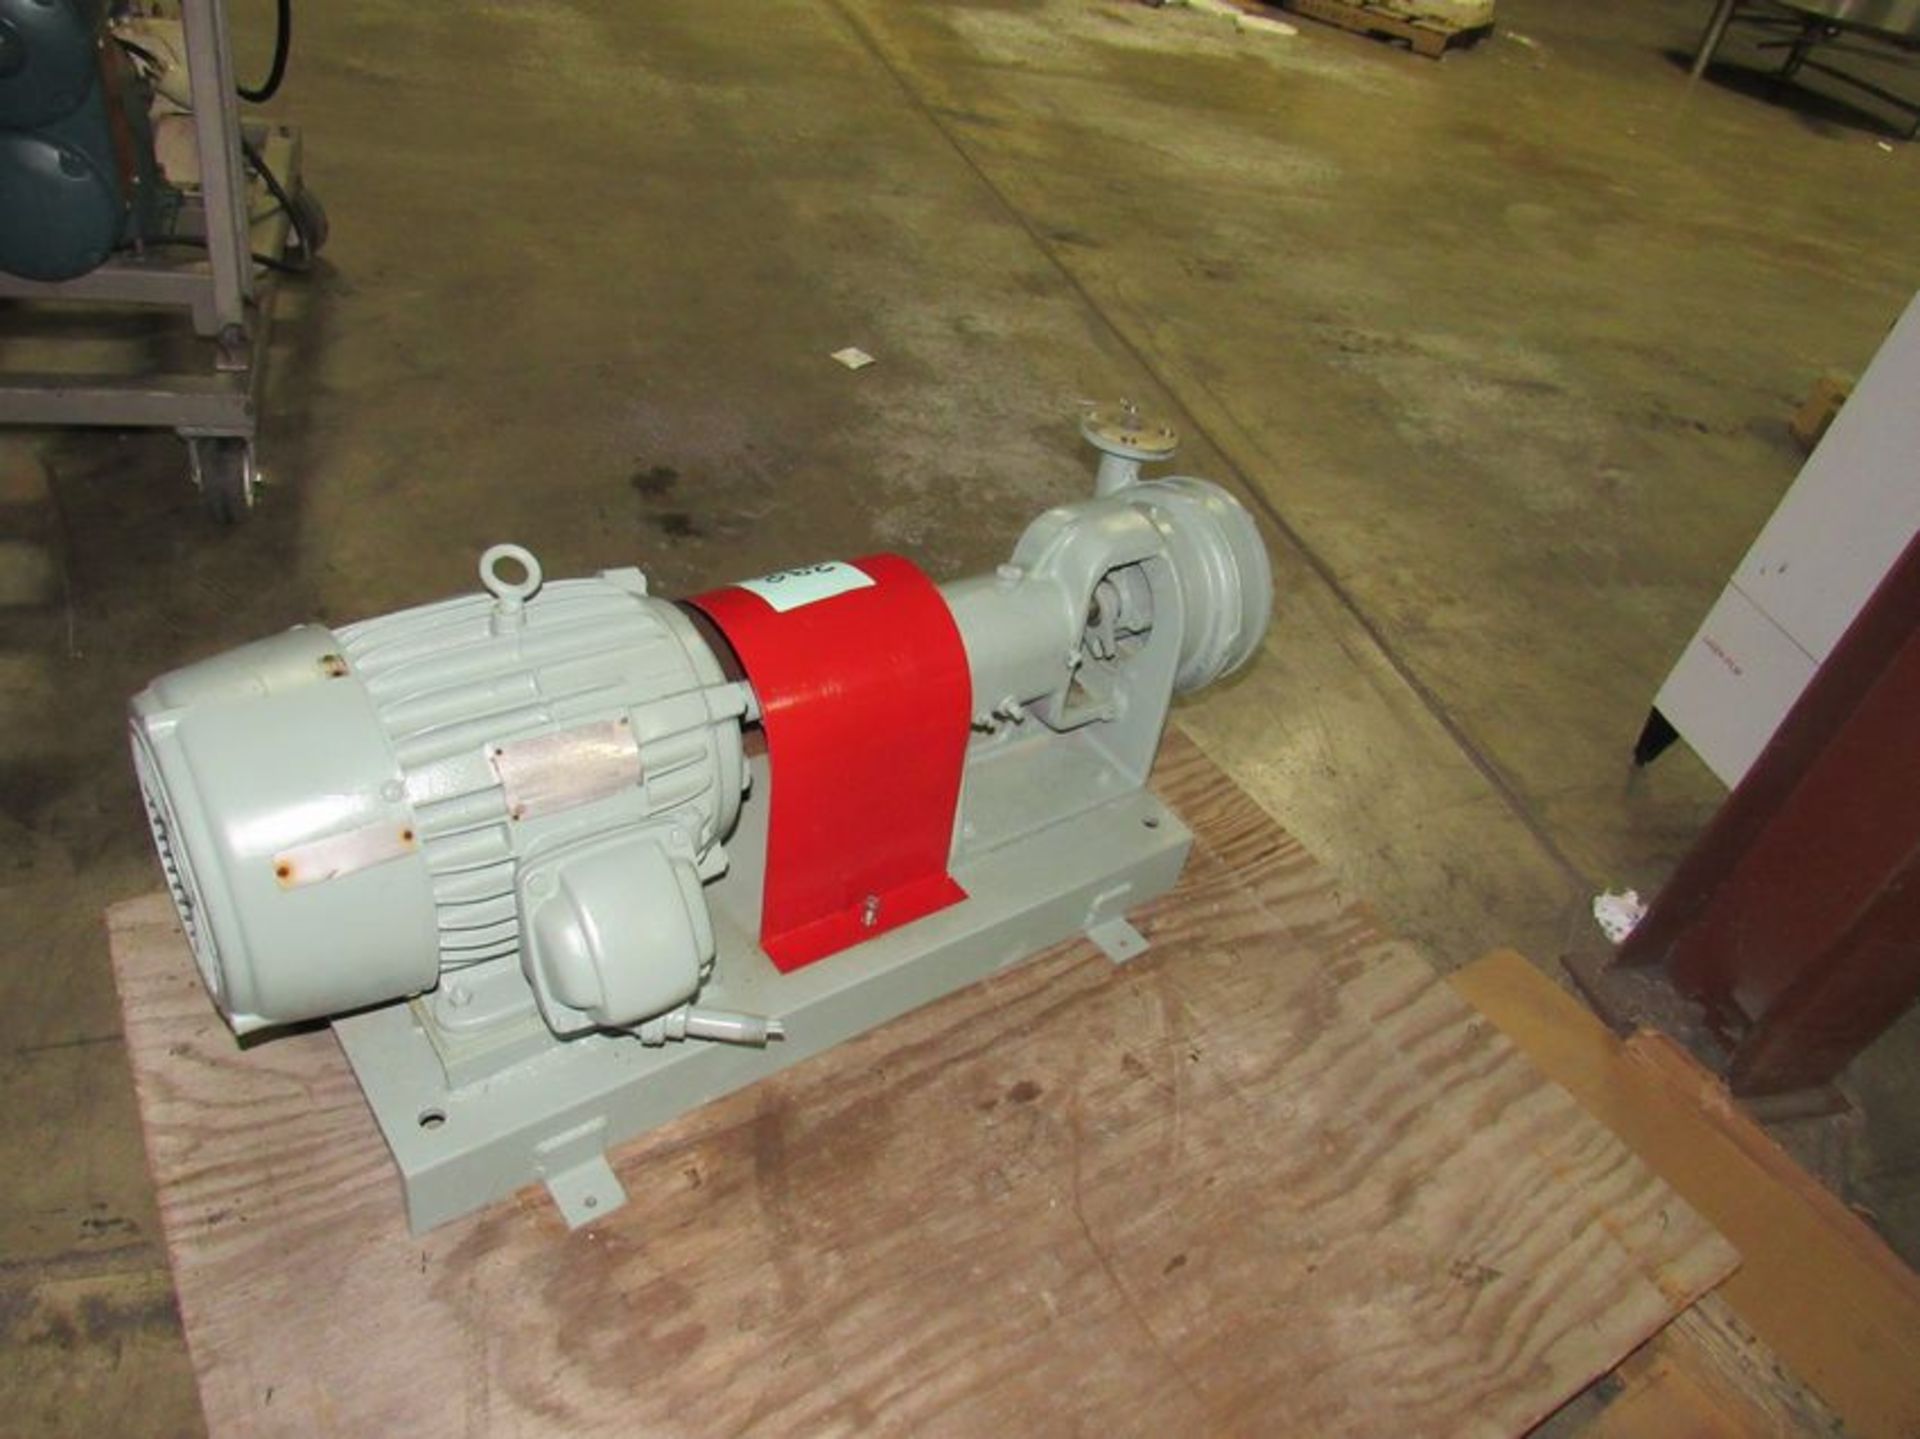 Worthington Centrifugal Pump Model D512, 1.5" by 1.0" Inlet/Outlet, Serial #Y648137P- Impeller - Image 7 of 10